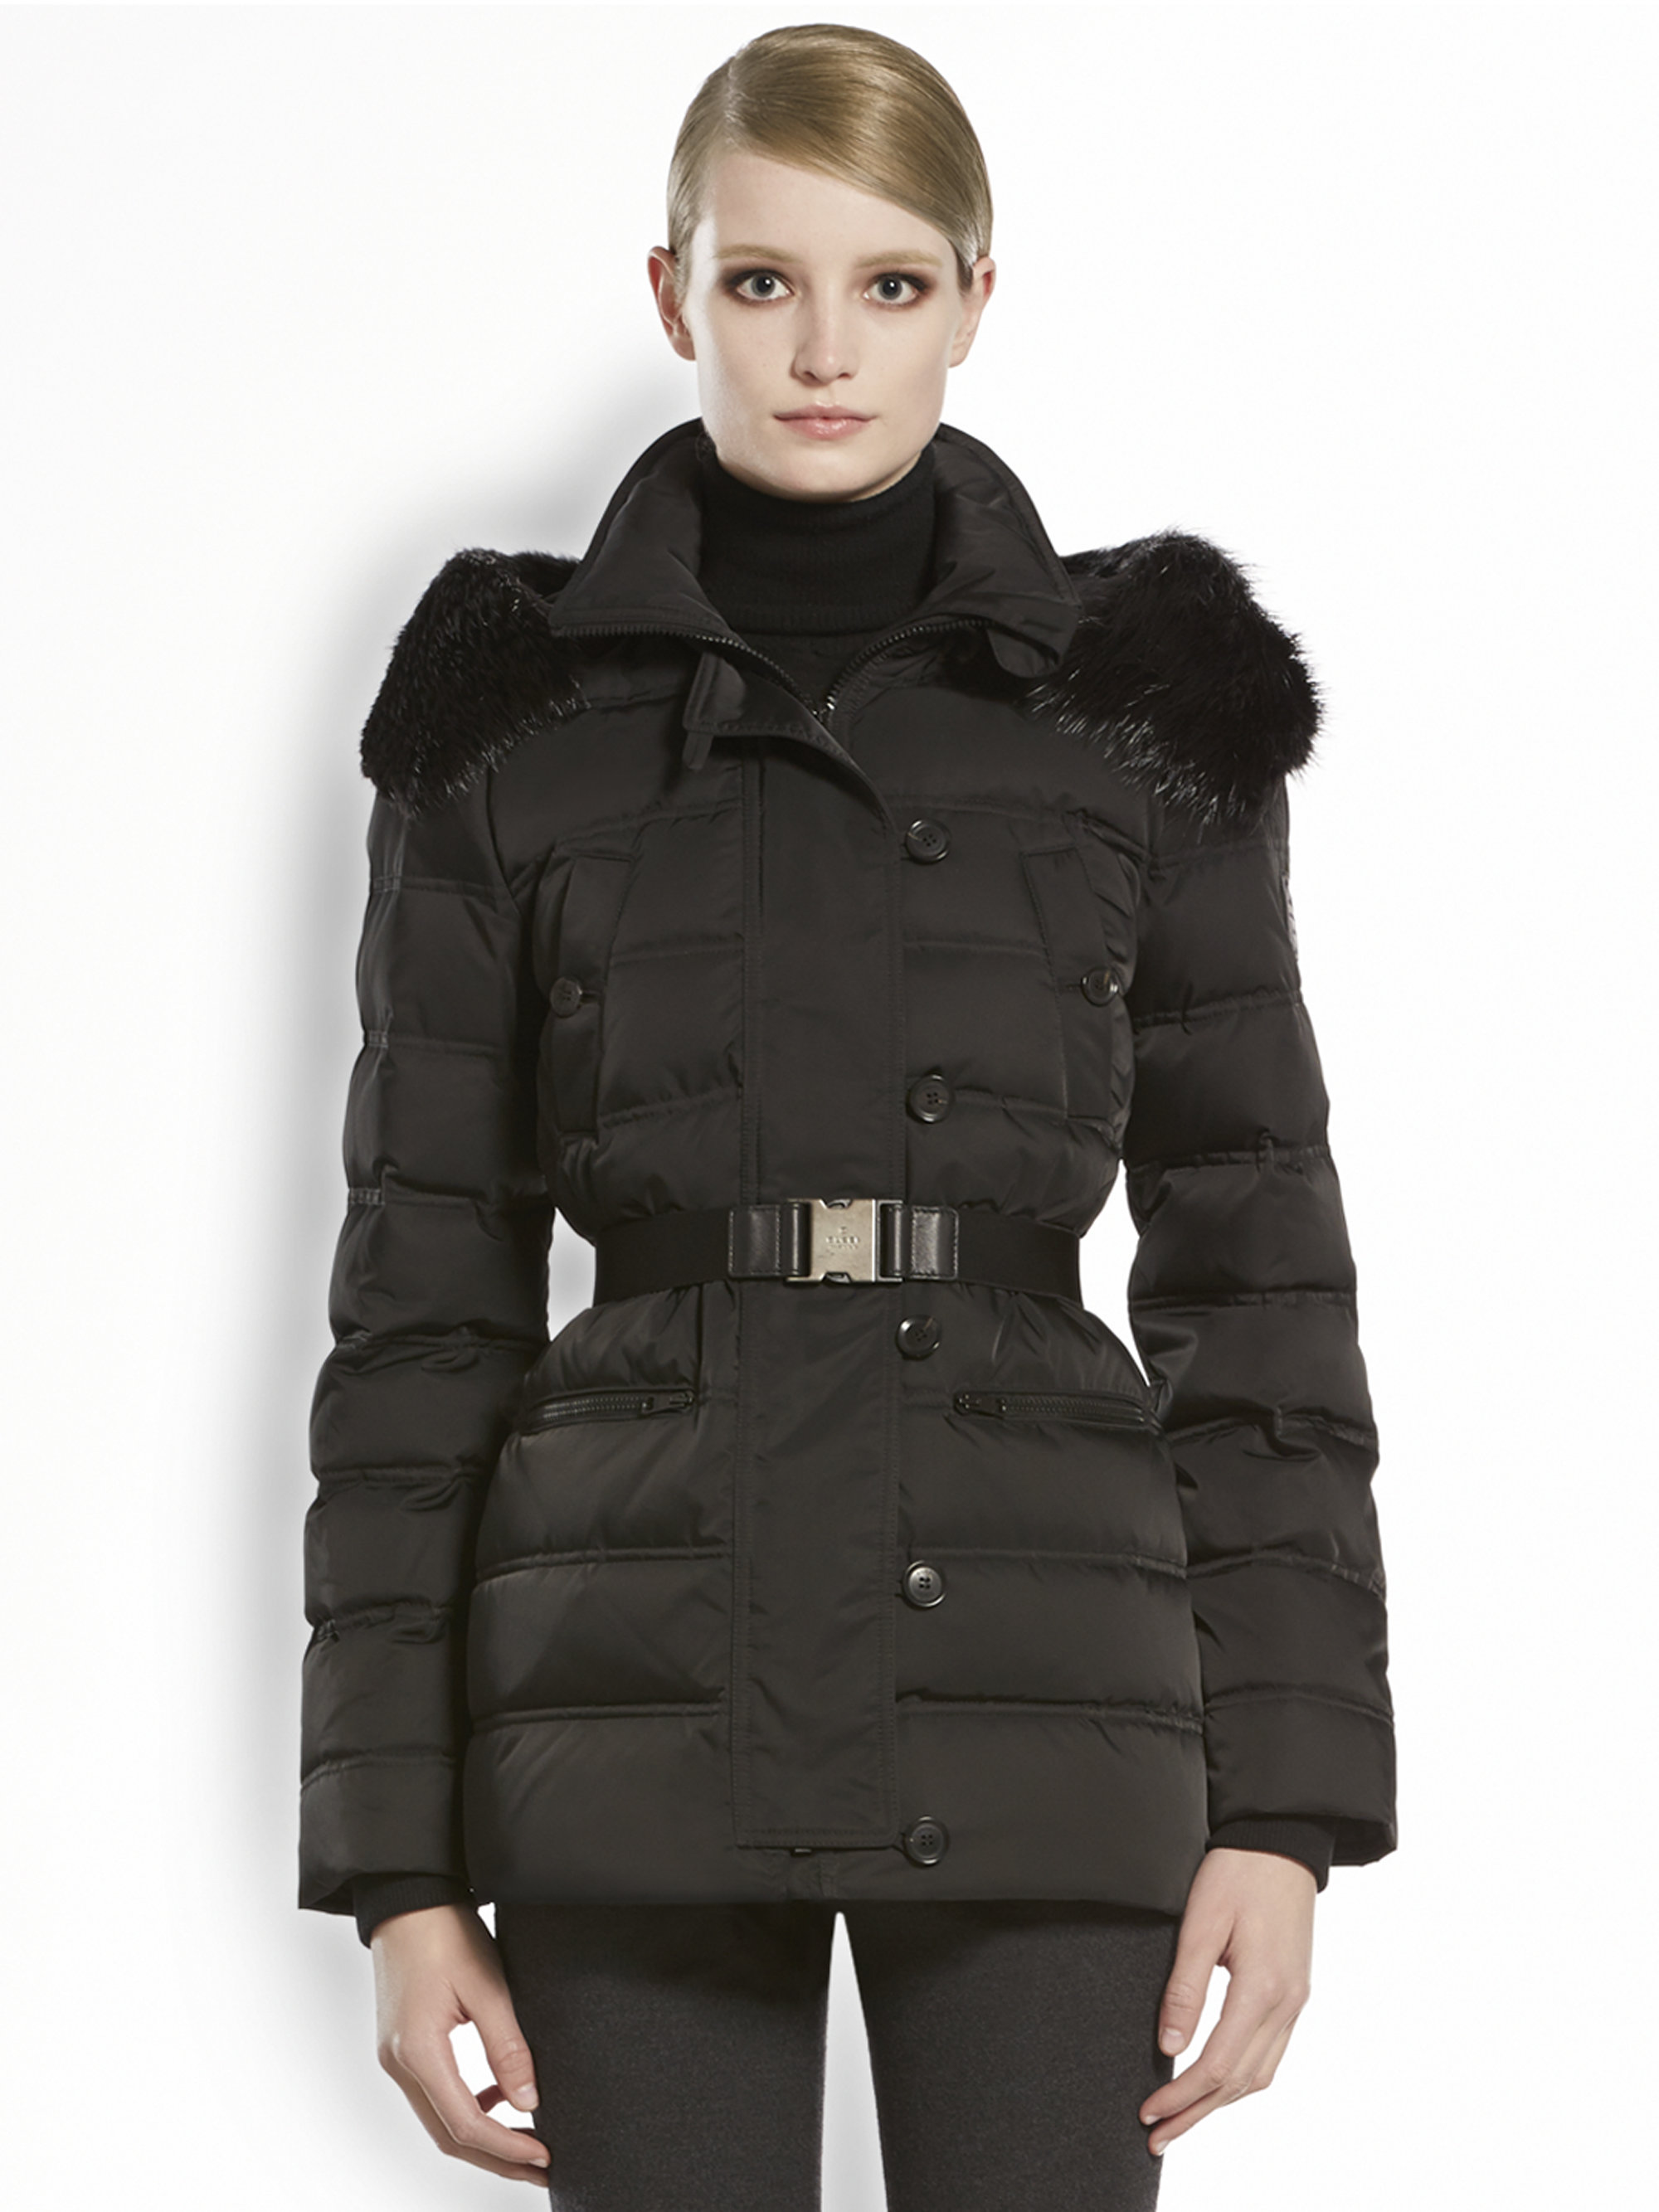 Lyst - Gucci Furtrimmed Hooded Puffer Jacket in Black